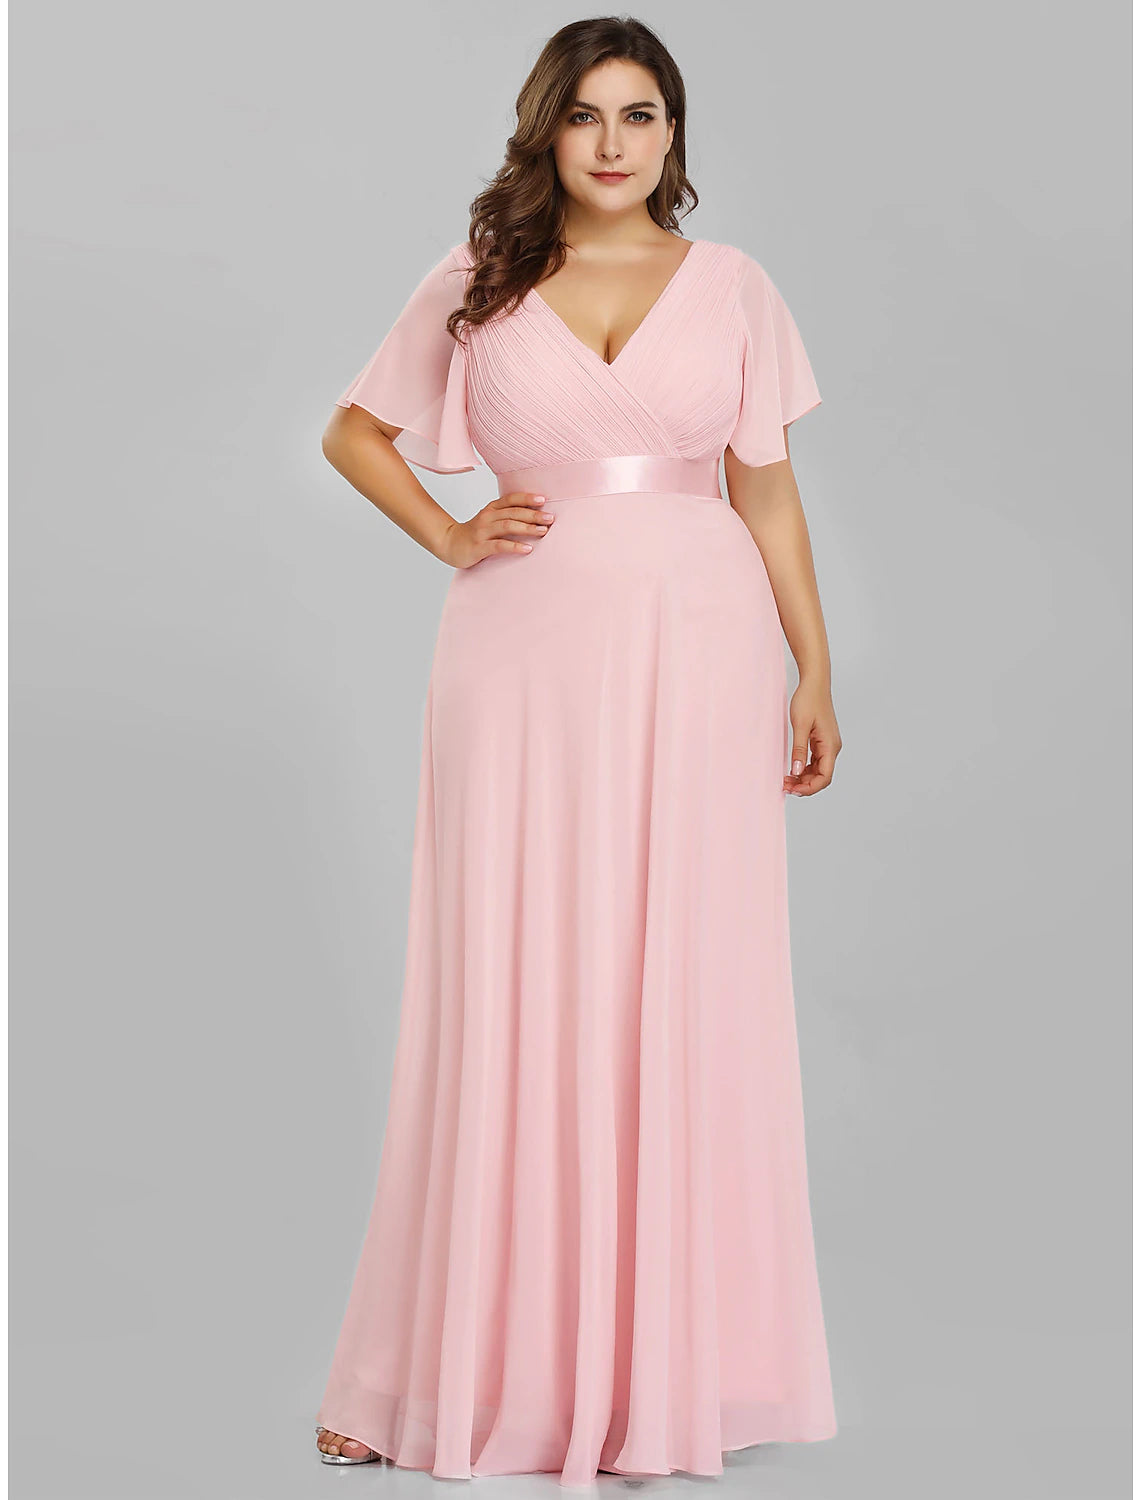 A-Line Empire Fall Wedding Guest Dress For Bridesmaid Plus Size Formal Evening Dress V Neck Short Sleeve Floor Length Chiffon with Pleats Ruched